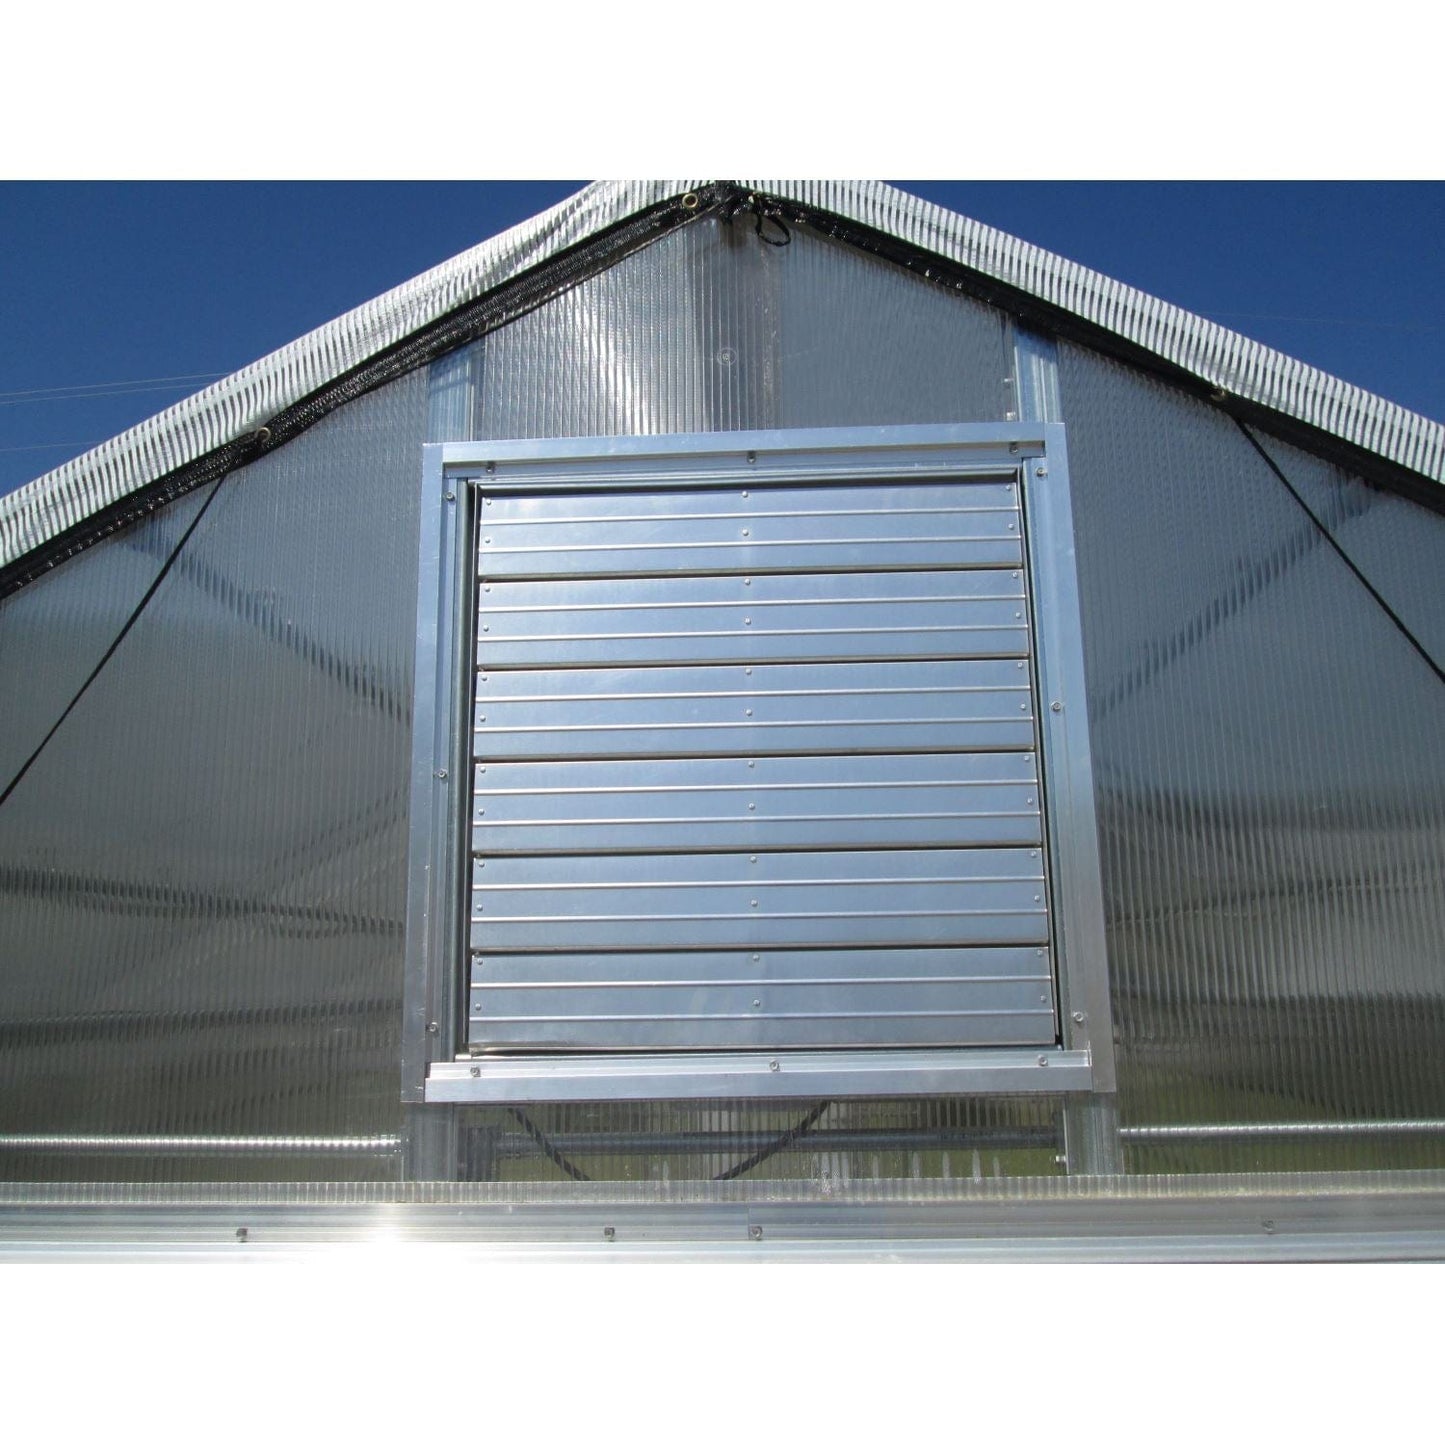 Riverstone Industries Deluxe Greenhouse Kit Riverstone | Whitney - Premium Grower's Edition - 12FT x 24FT Educational Greenhouse Kit With 8FT High Walls R12248-PG